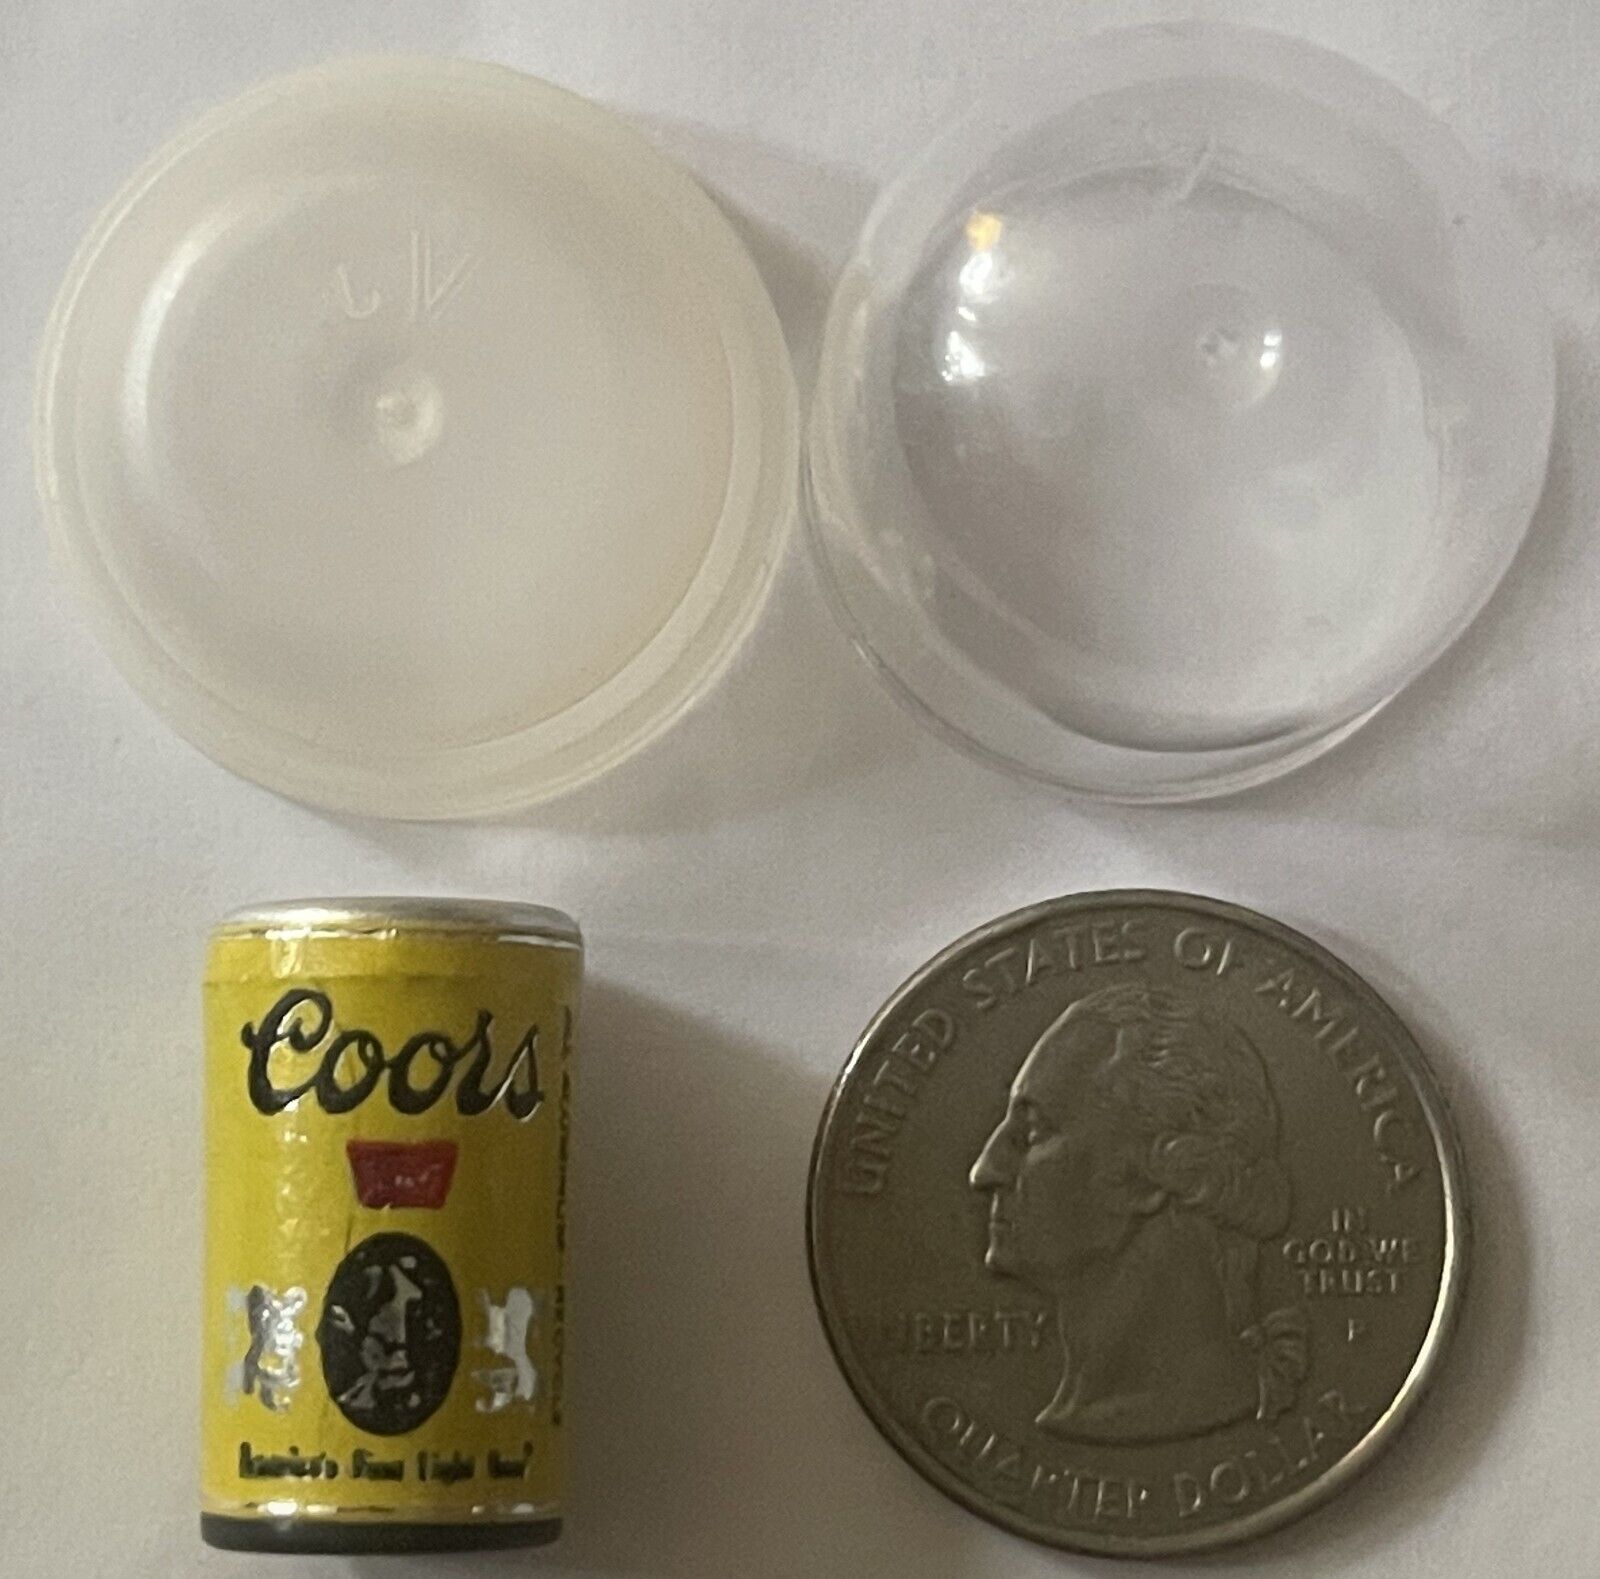 Vintage 1970s Mini Coors Beer Can Vending | Gumball